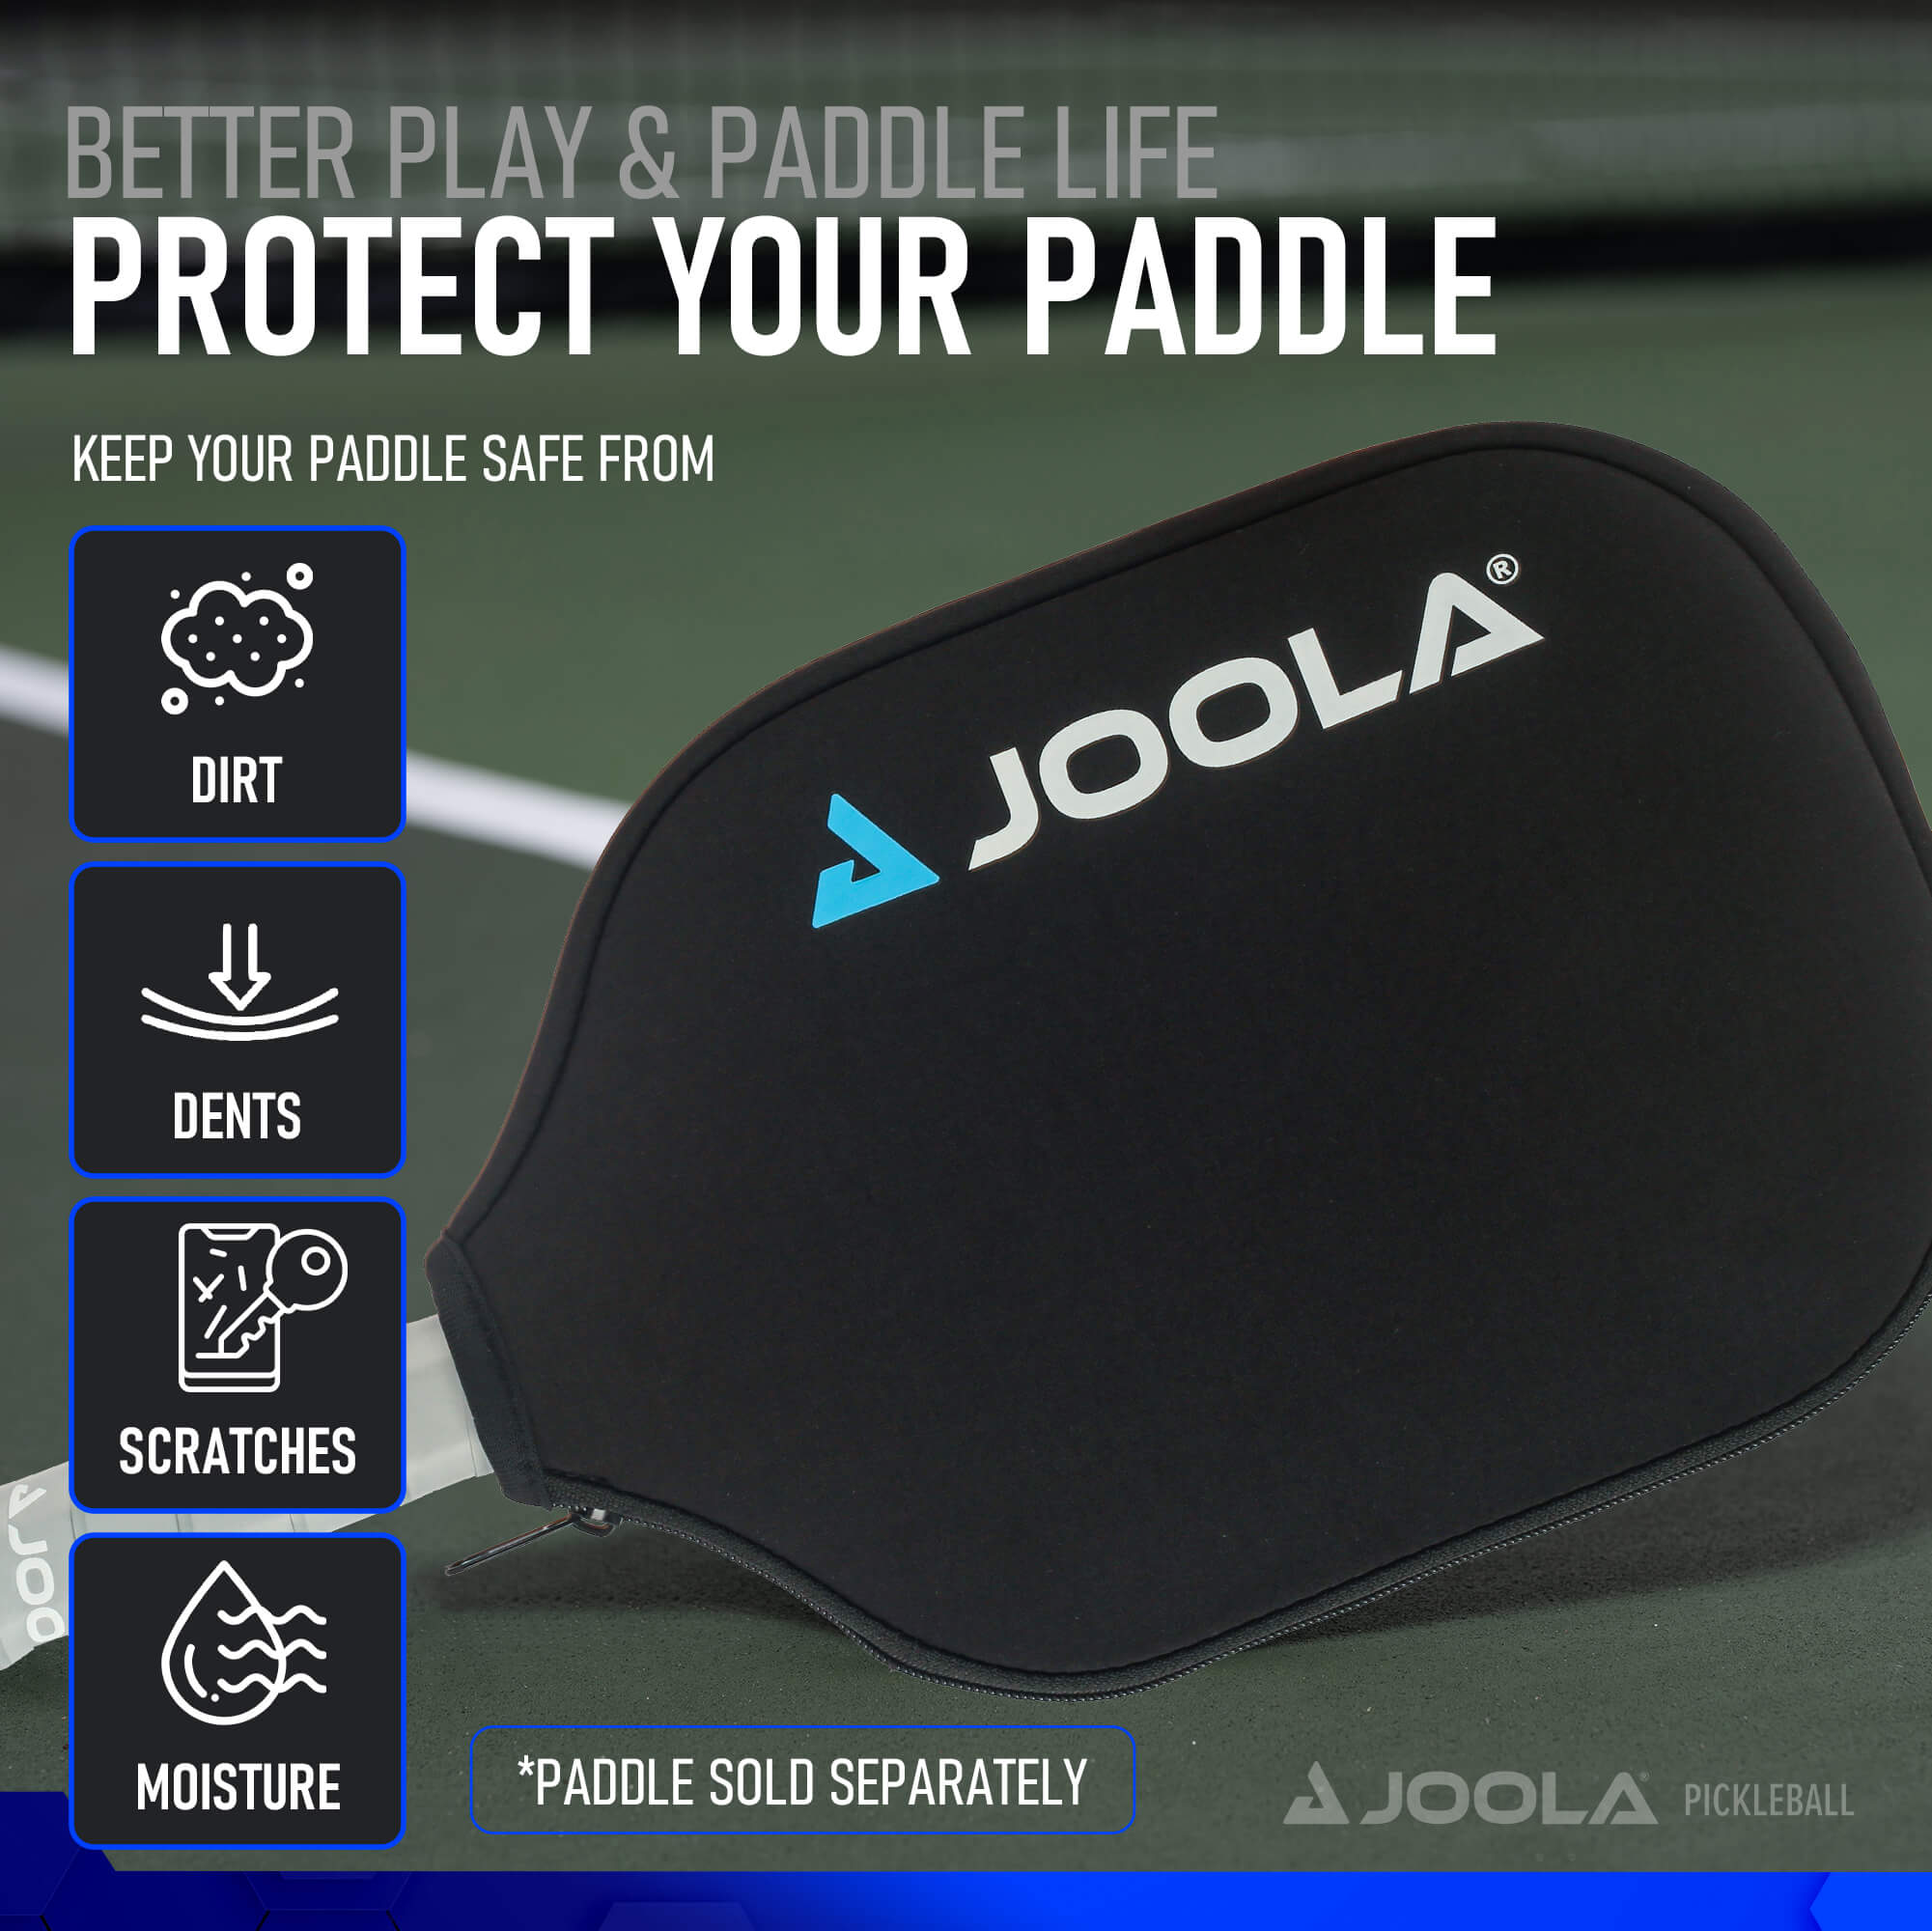 Infographic: "Better play & paddle life. Protect your paddle. Keep your paddle safe from dirt, dents, scratches, moisture. Paddle sold separately."